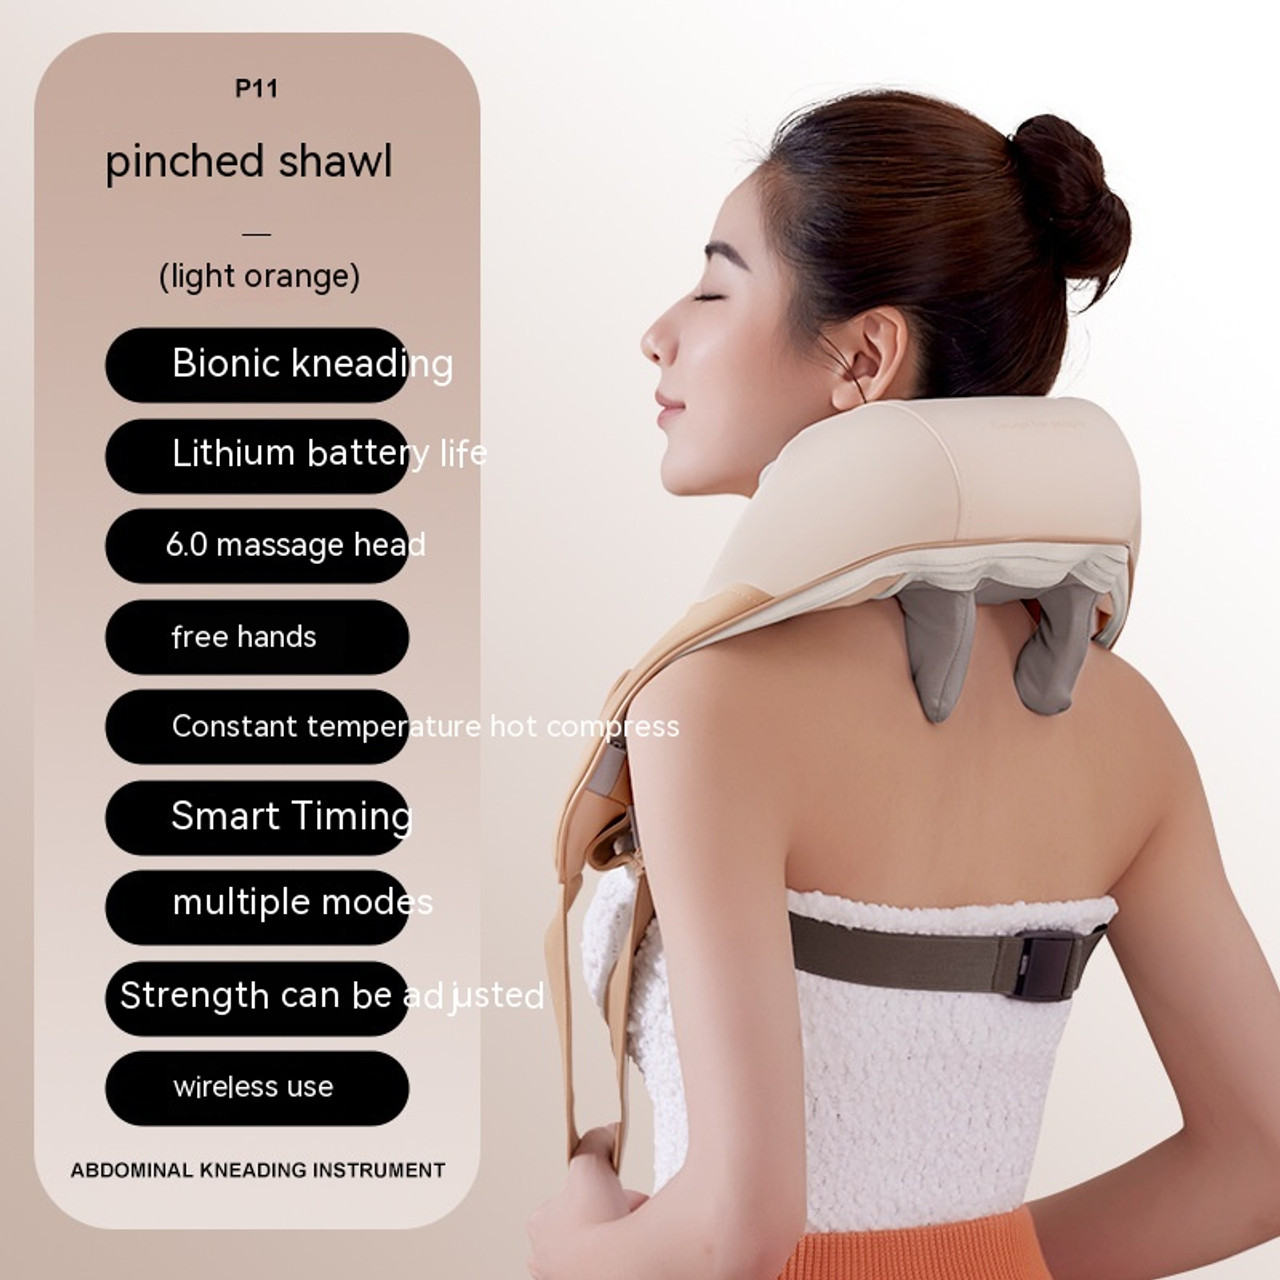 Massage Pillow Massage Shawl, Portable Electric Tapping Cervical Massage Shawl, Neck, Waist, Shoulder, Multiple Modes, 20 Intensity Levels, 15 Minutes